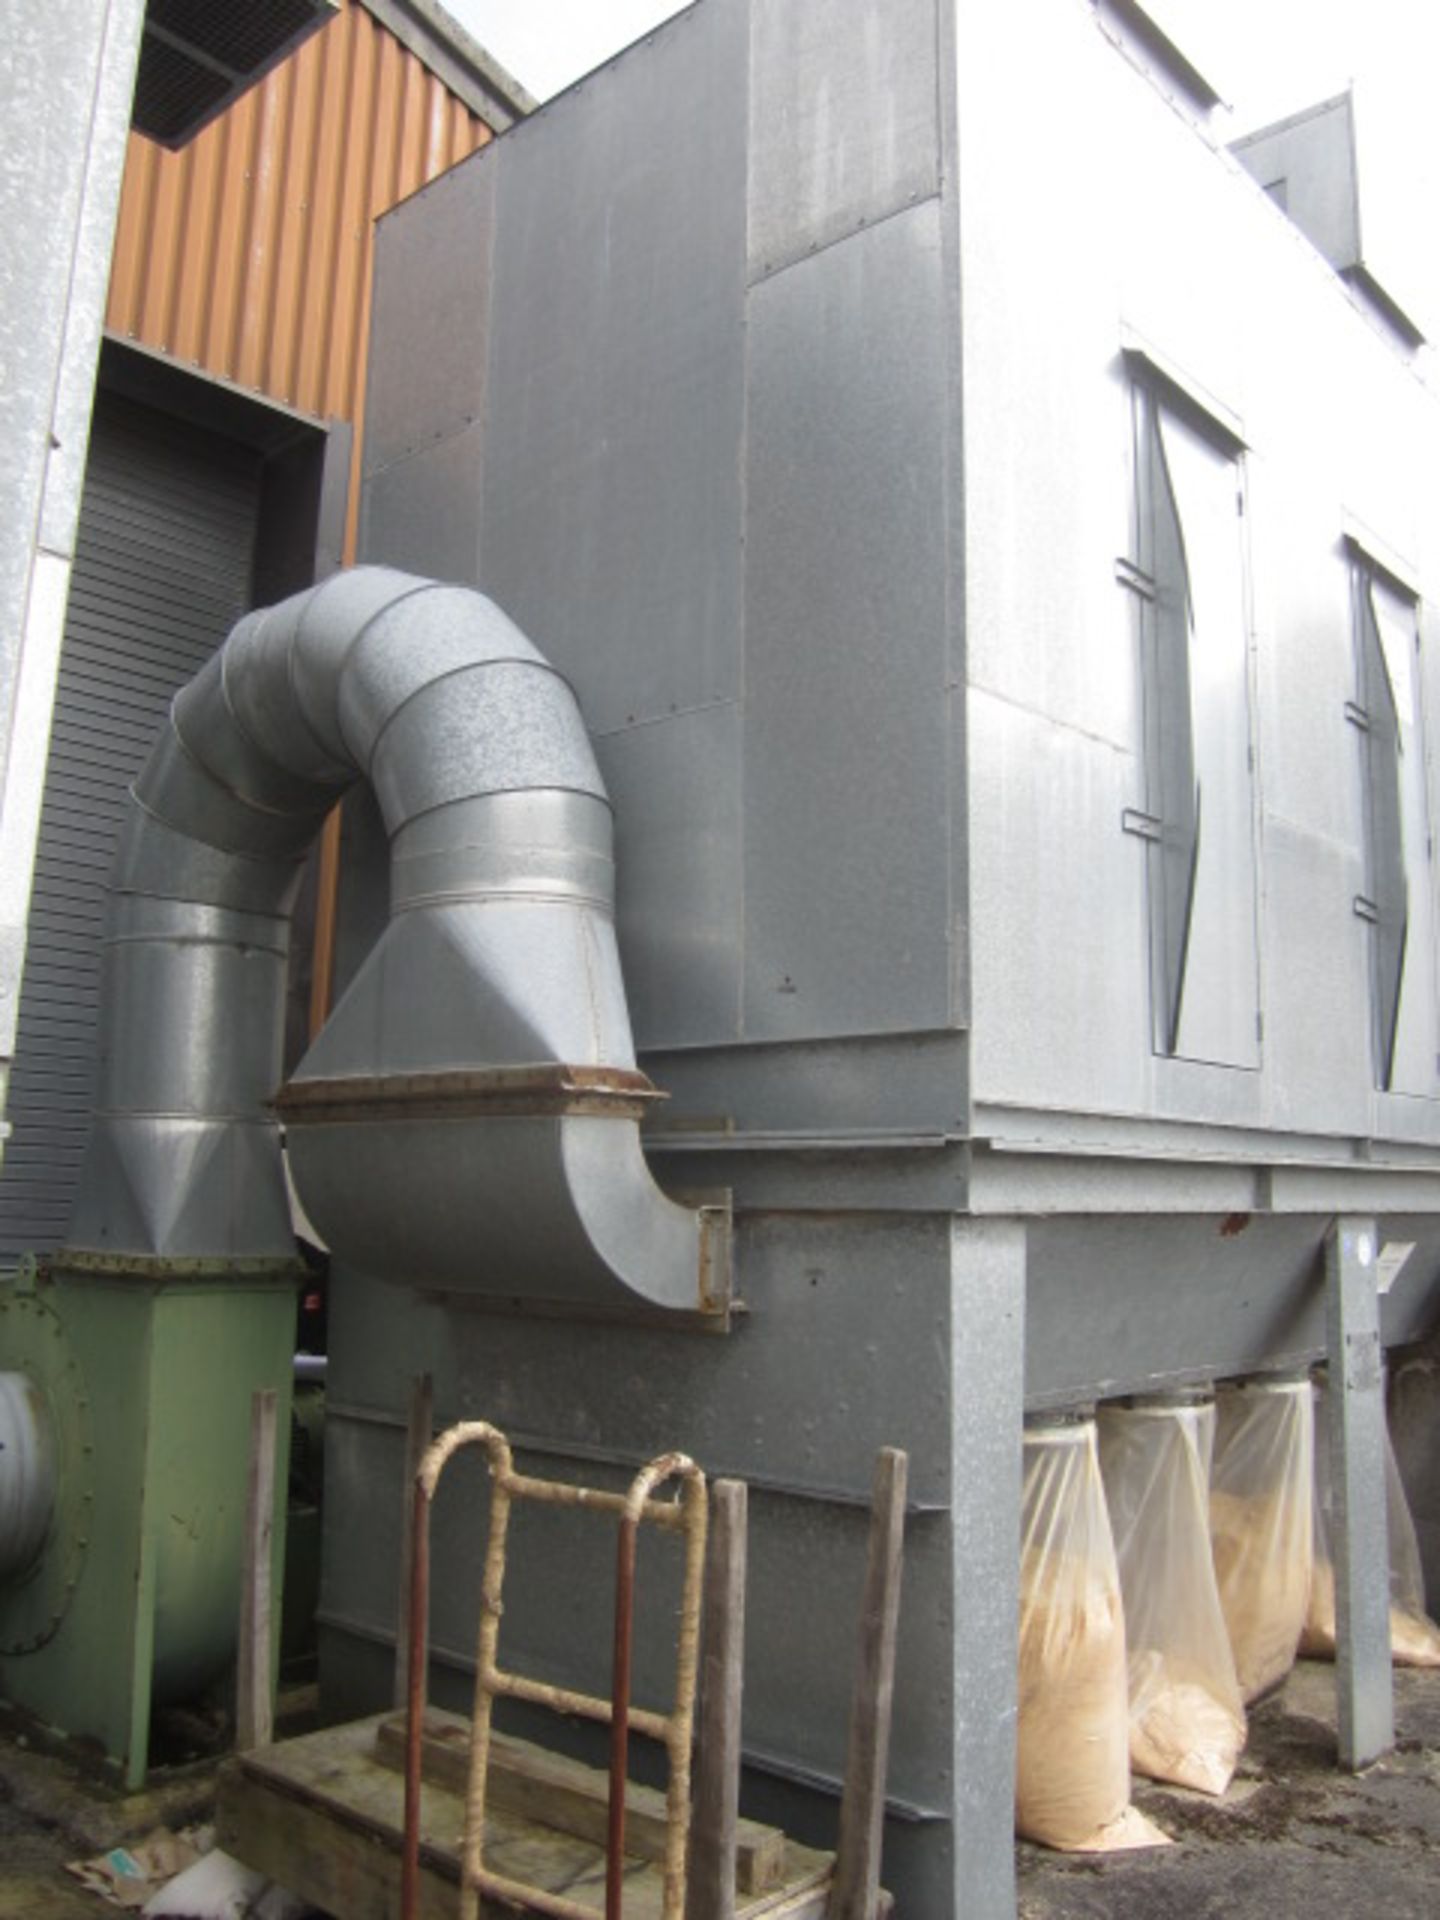 Airplants galvanised steel, heavy duty dust extraction unit, with 10 bag outlet, APL 60MD extraction - Image 3 of 8